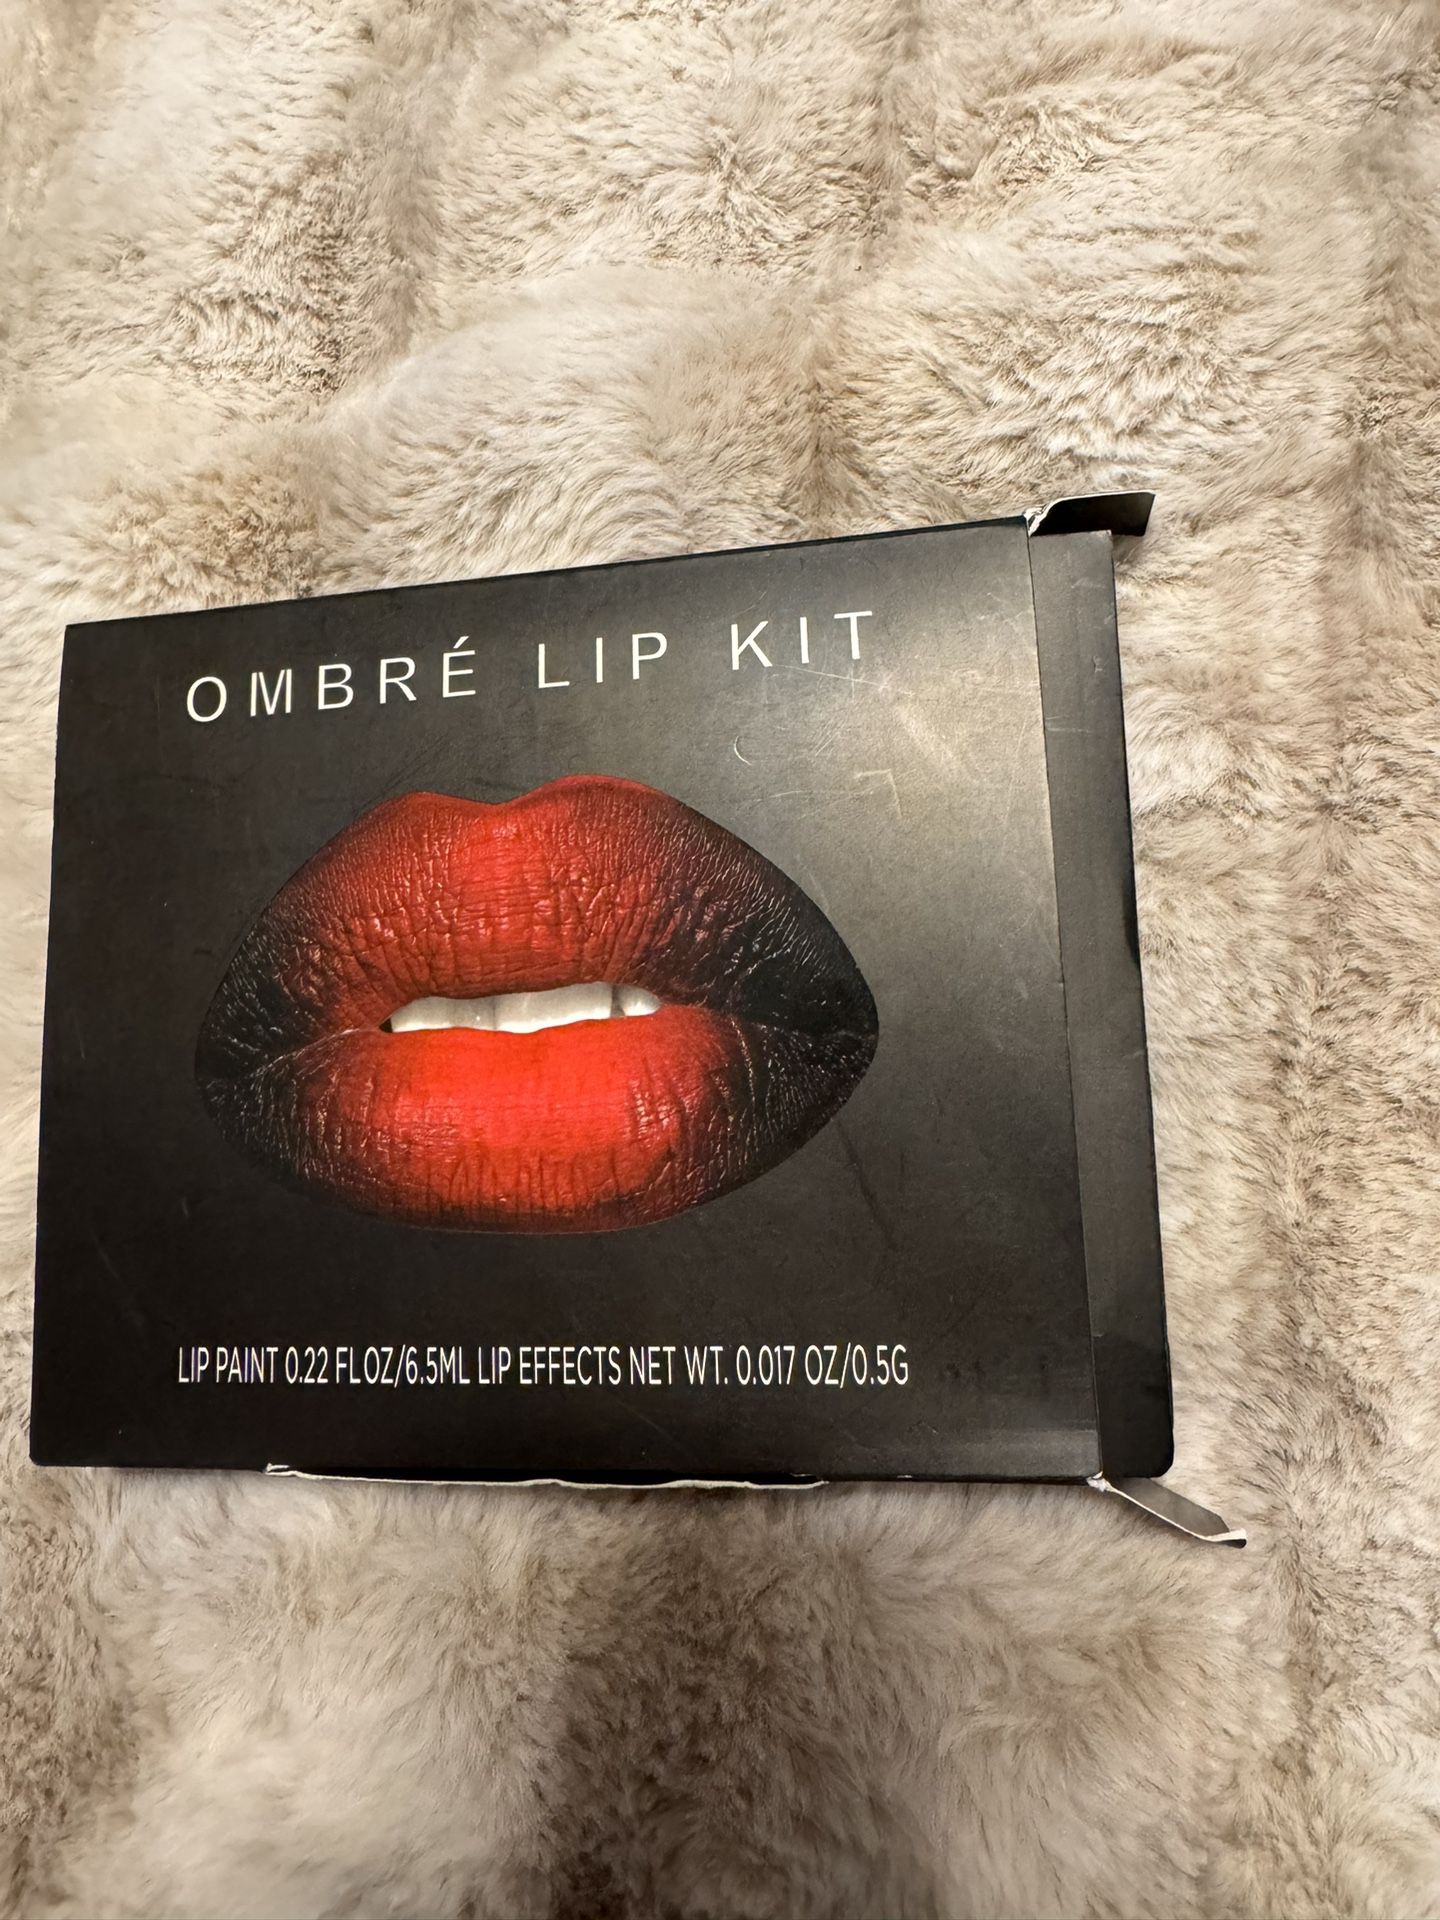 Red And Black Ombré Lip Kit 